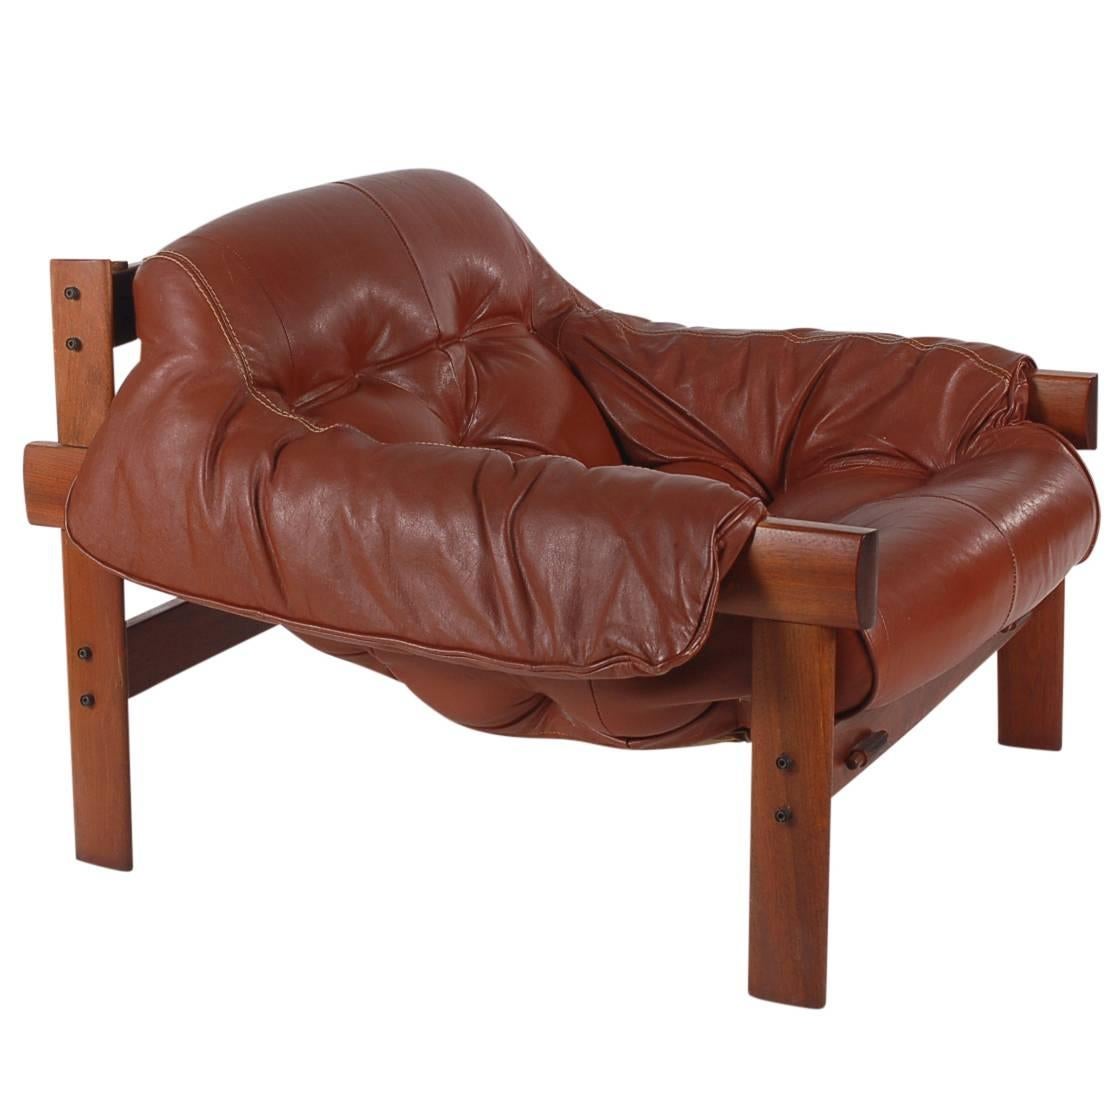 Percival Lafer Brazilian Rosewood and Leather Lounge Chair